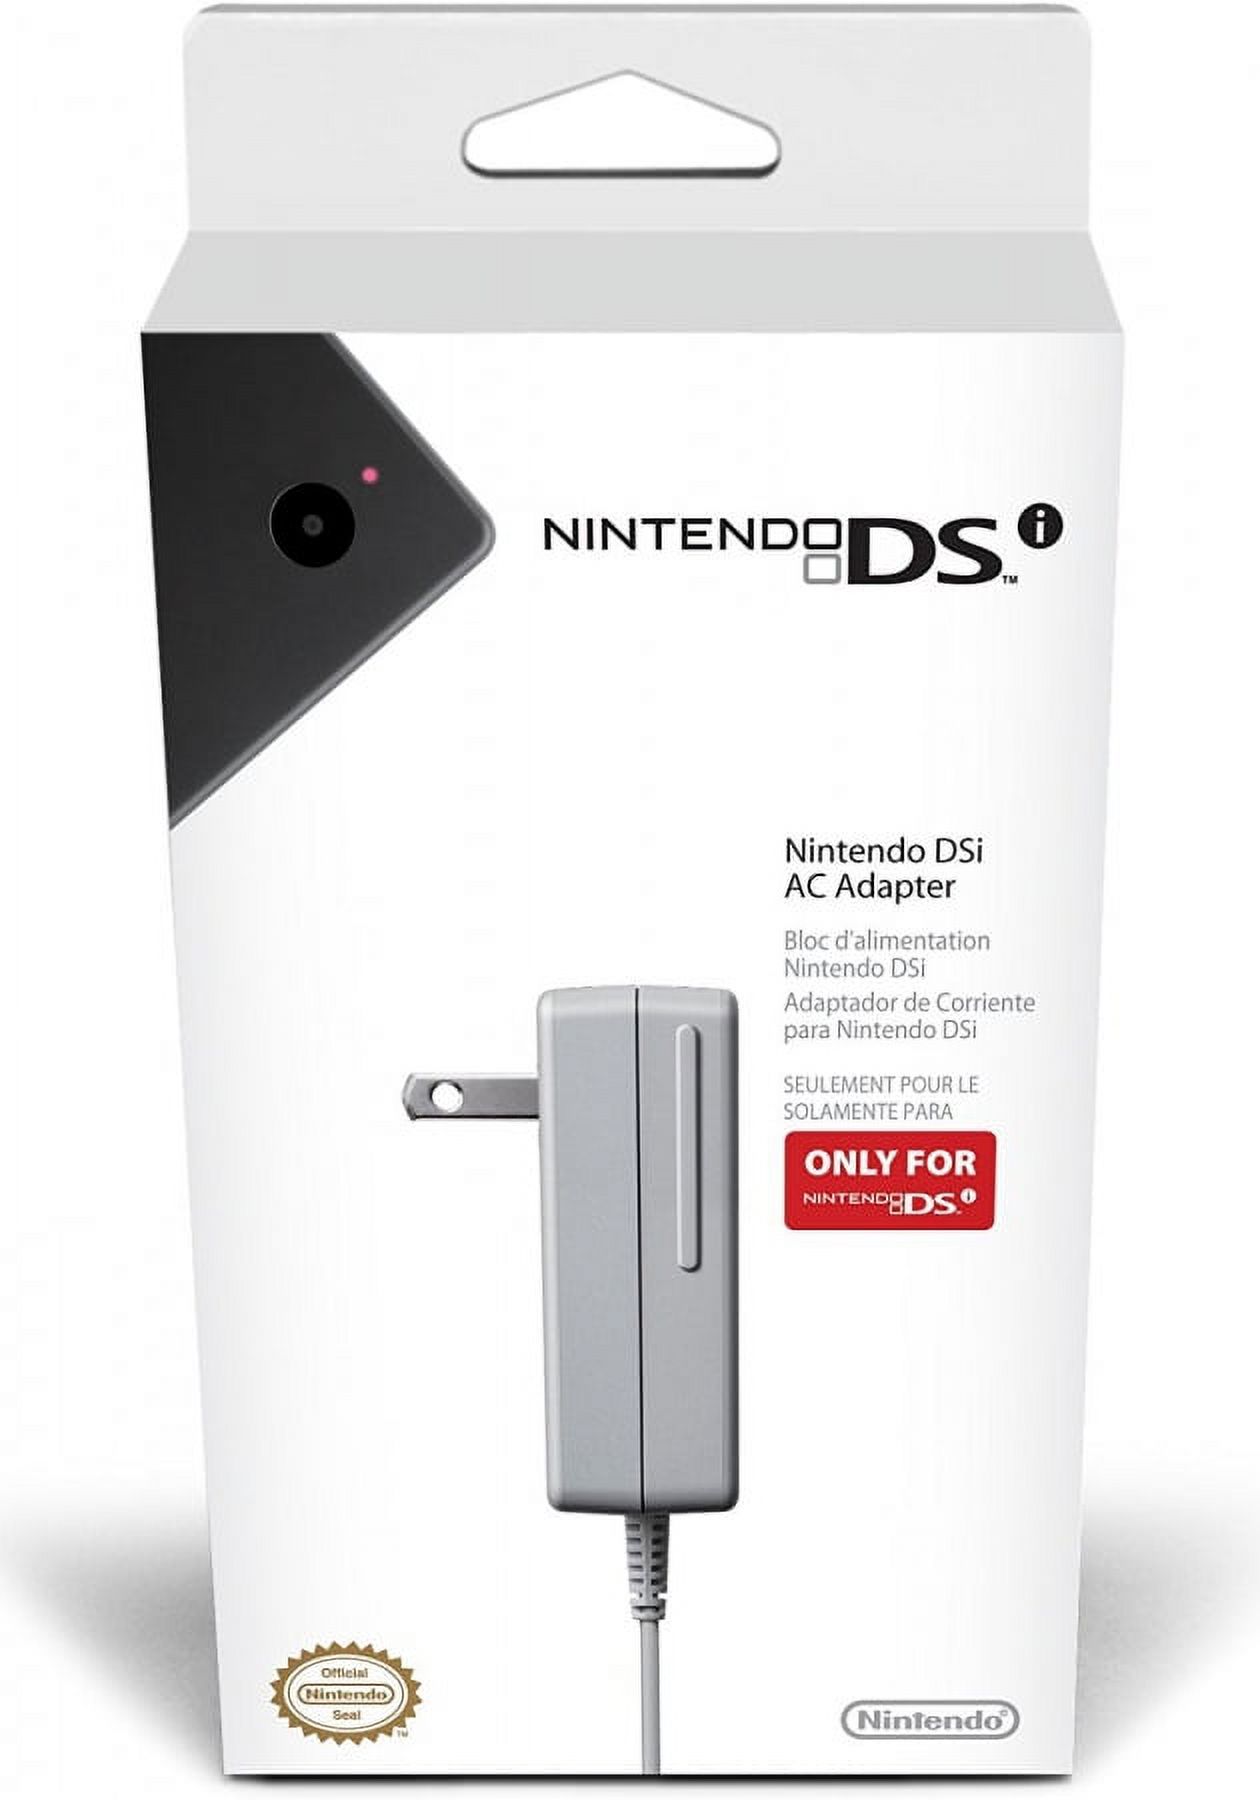 Nintendo AC Adapter - compatible with 3DS, 3DS XL, DSi, DSi XL and 2DS systems - image 2 of 2